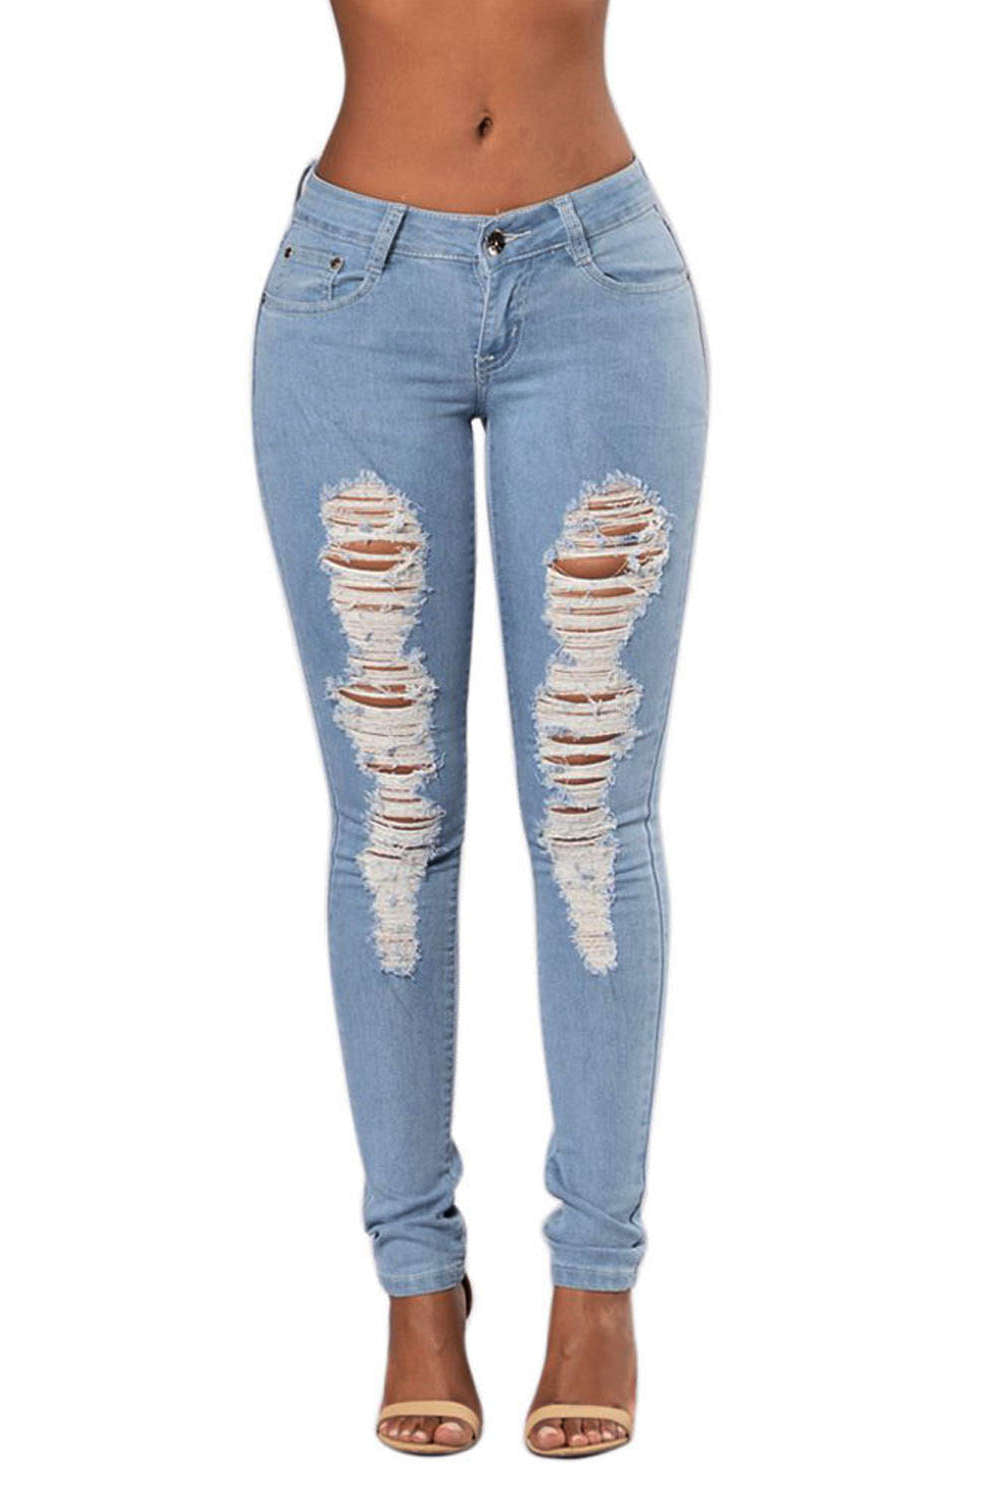 Iyasson Women's Low Rise Ripped Jeans